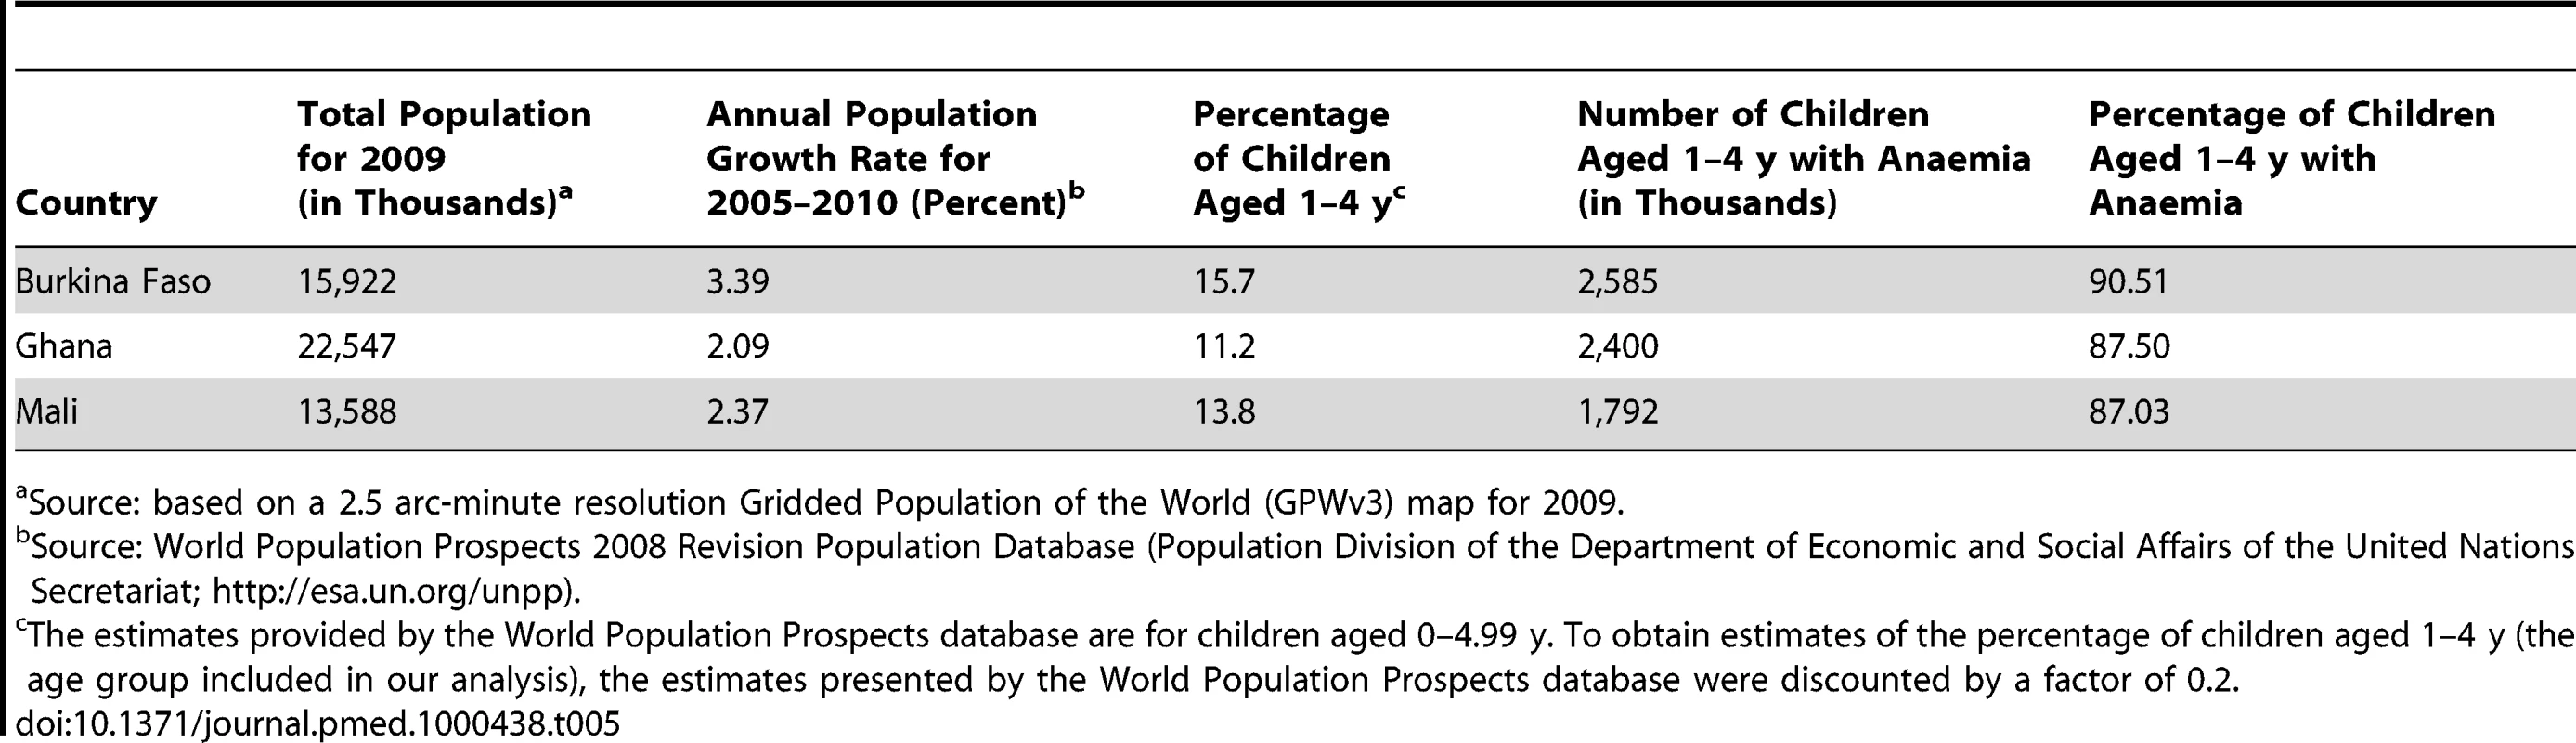 Predicted number of children aged 1–4 y with anaemia in Burkina Faso, Ghana, and Mali in 2011.